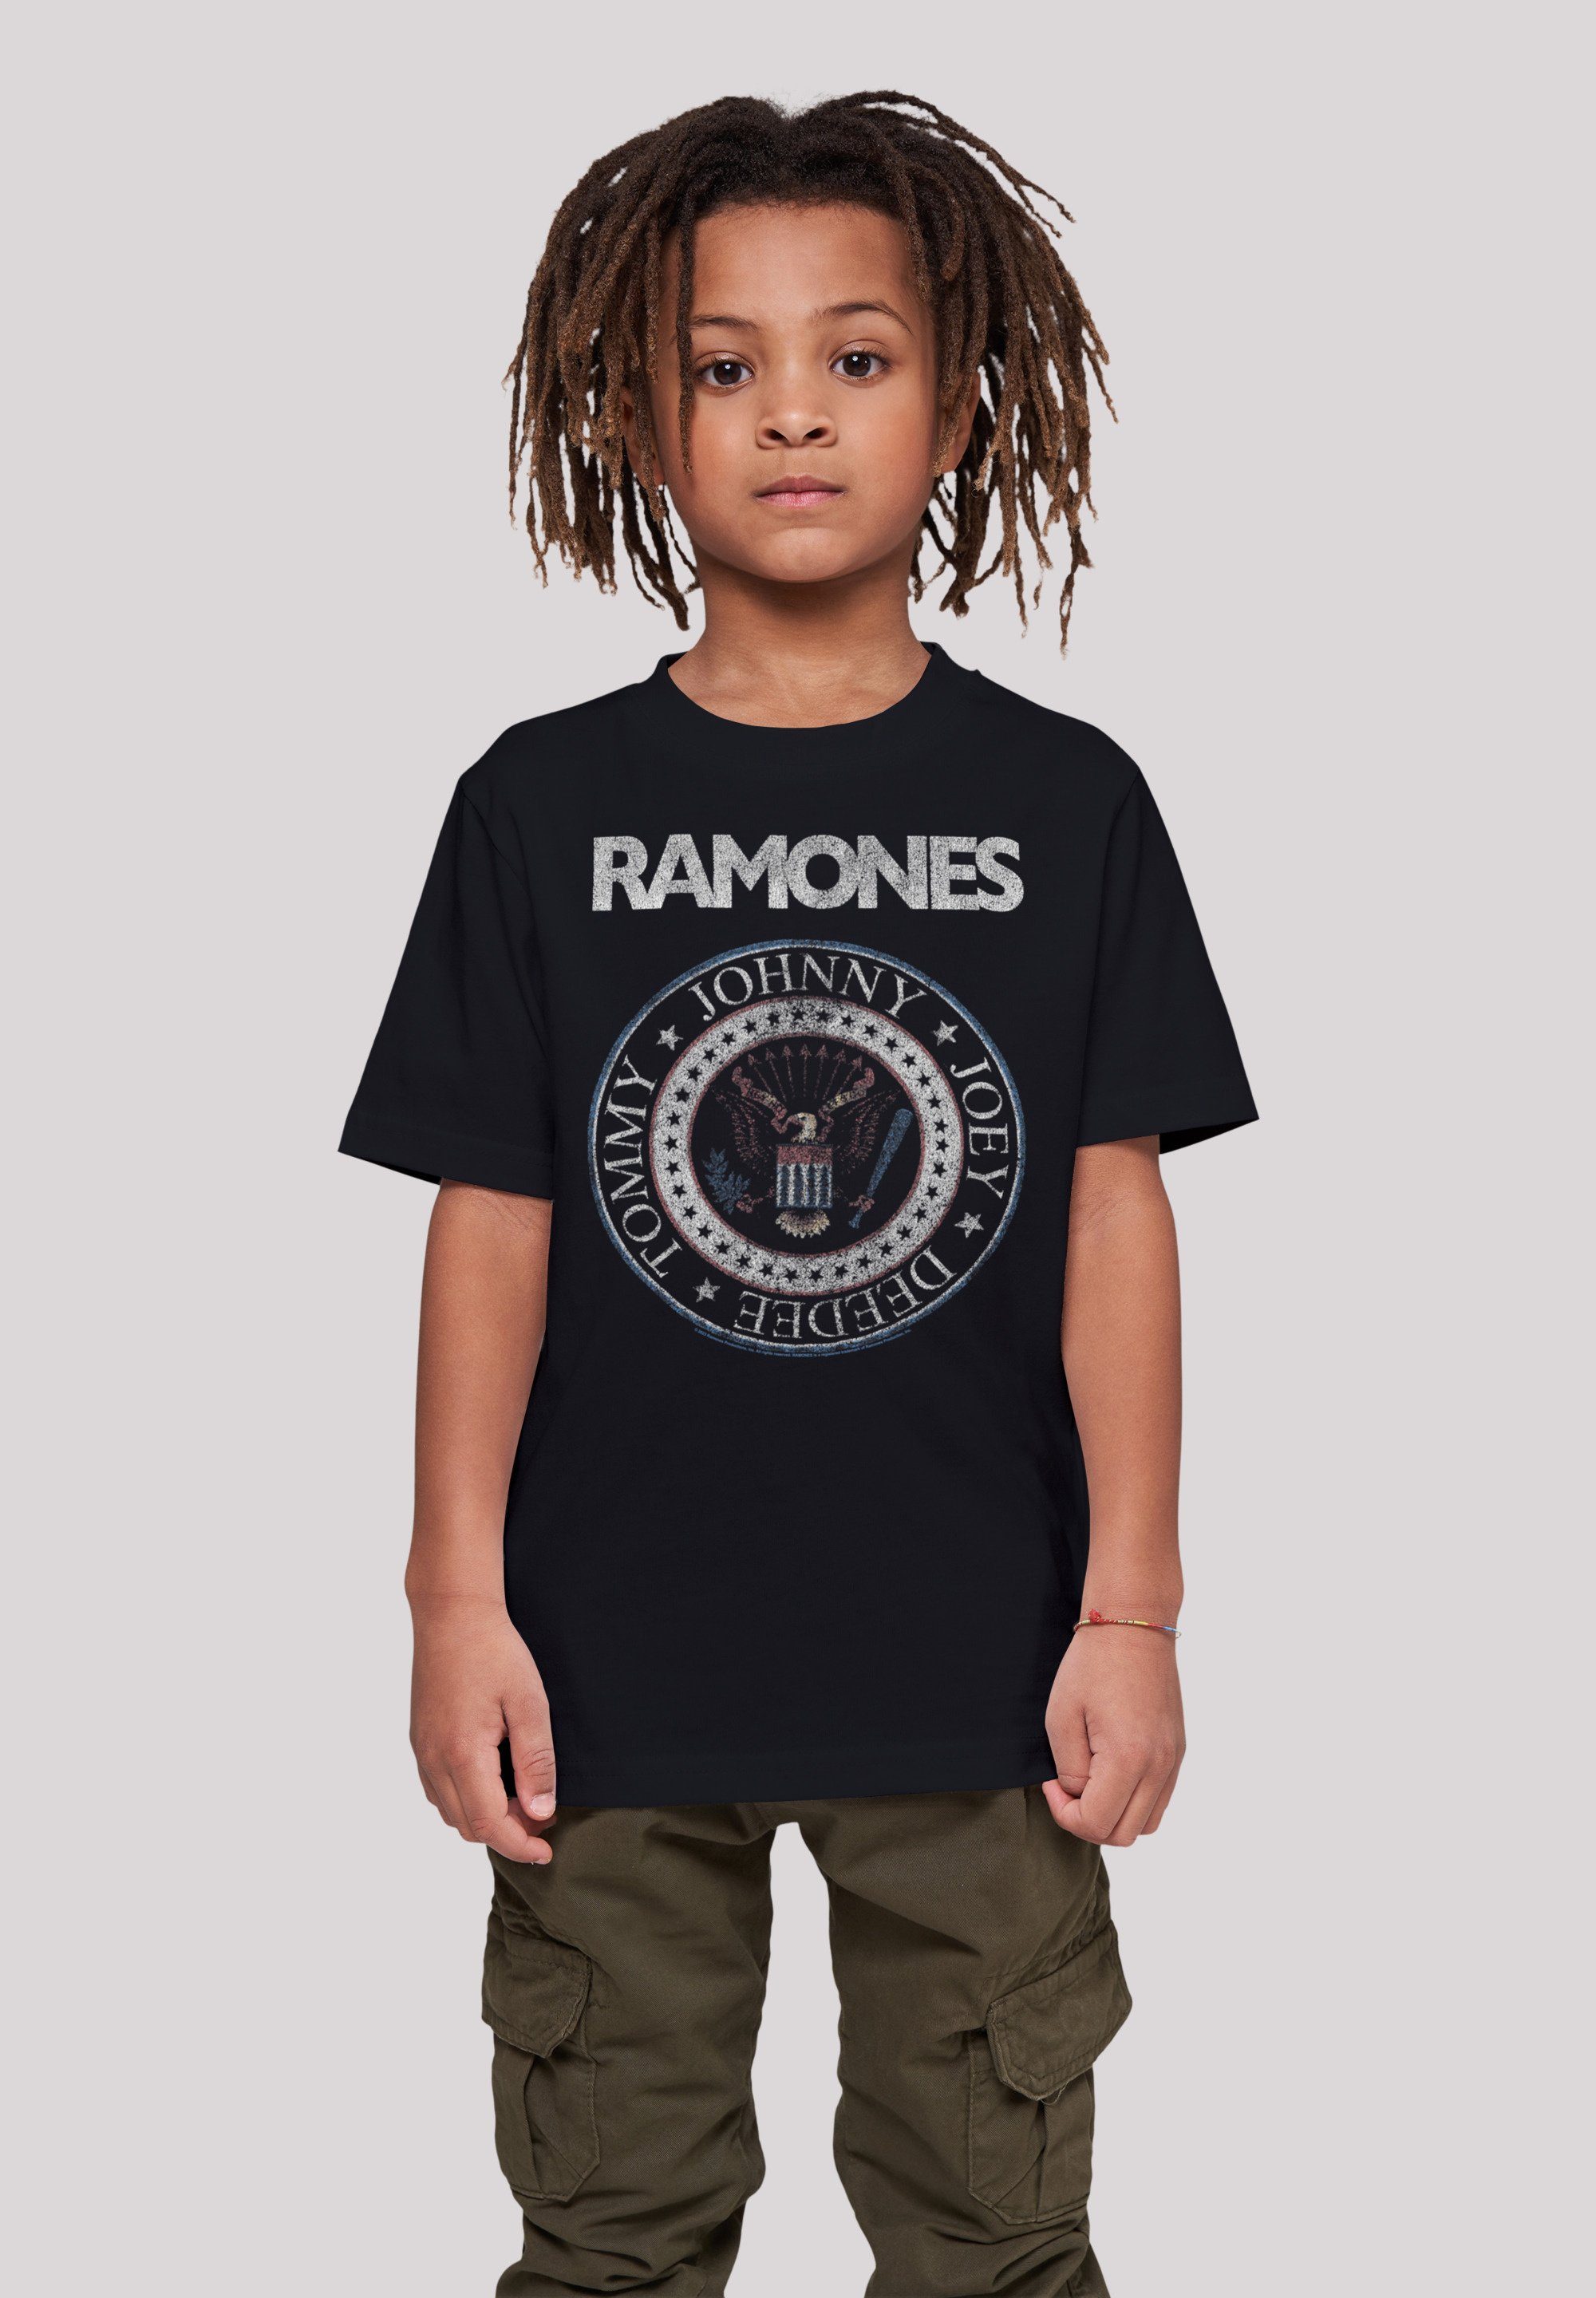 F4NT4STIC T-Shirt Ramones Rock Musik Band Red White And Seal Premium Qualität, Band, Rock-Musik | T-Shirts